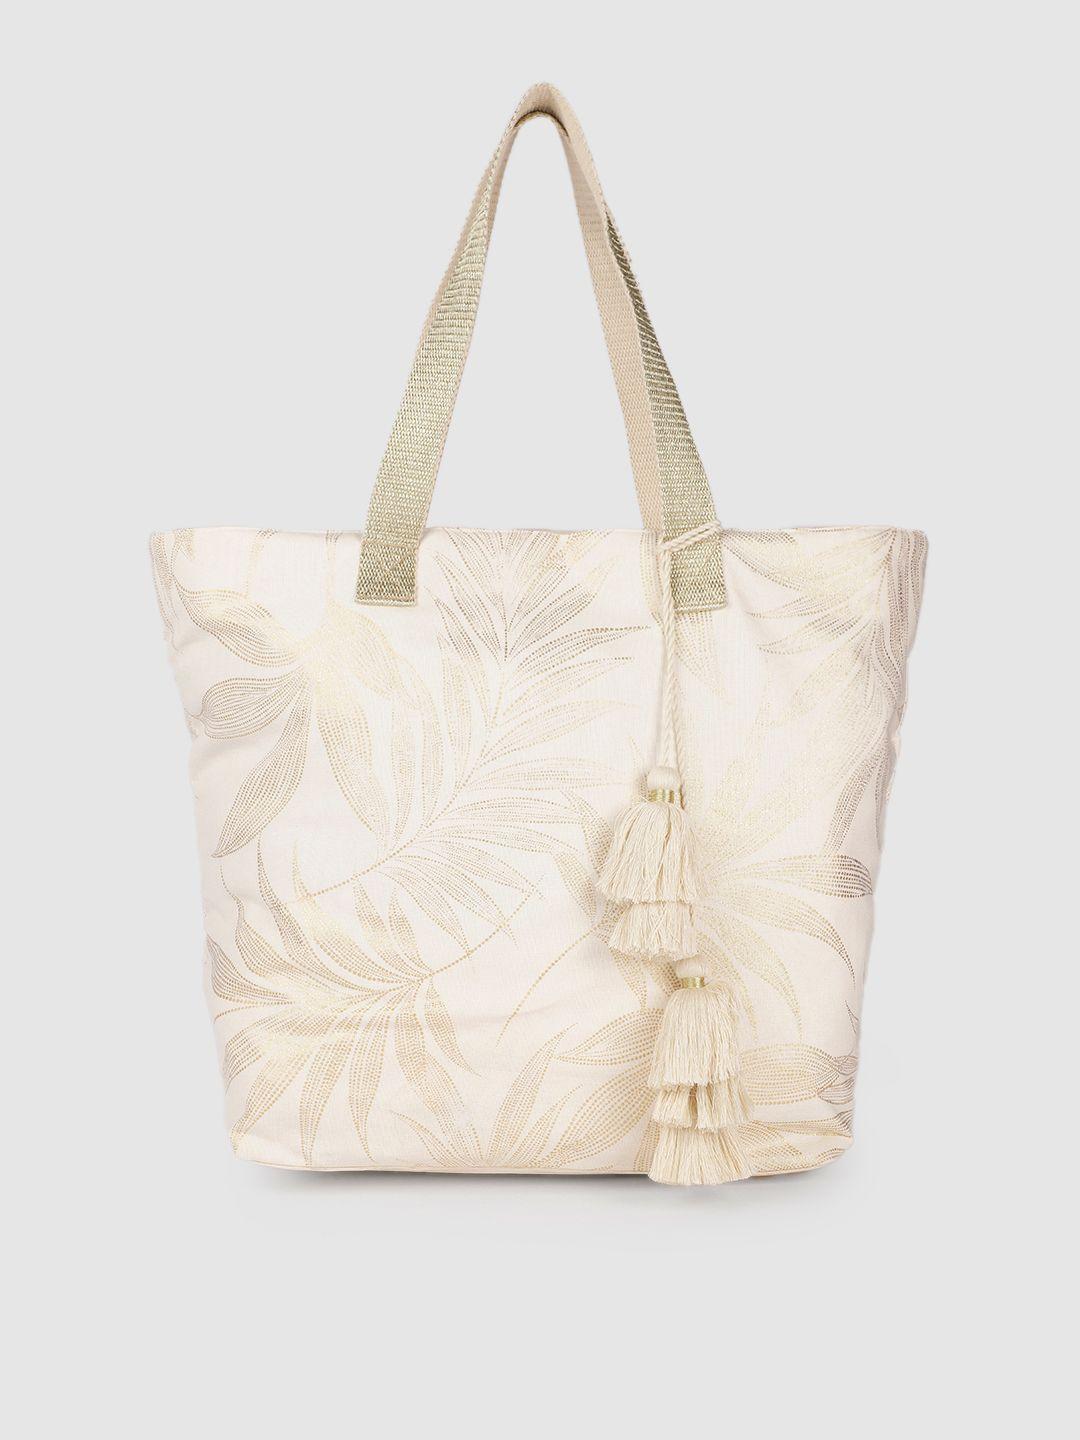 accessorize off-white printed shopper tote bag with tasselled detail